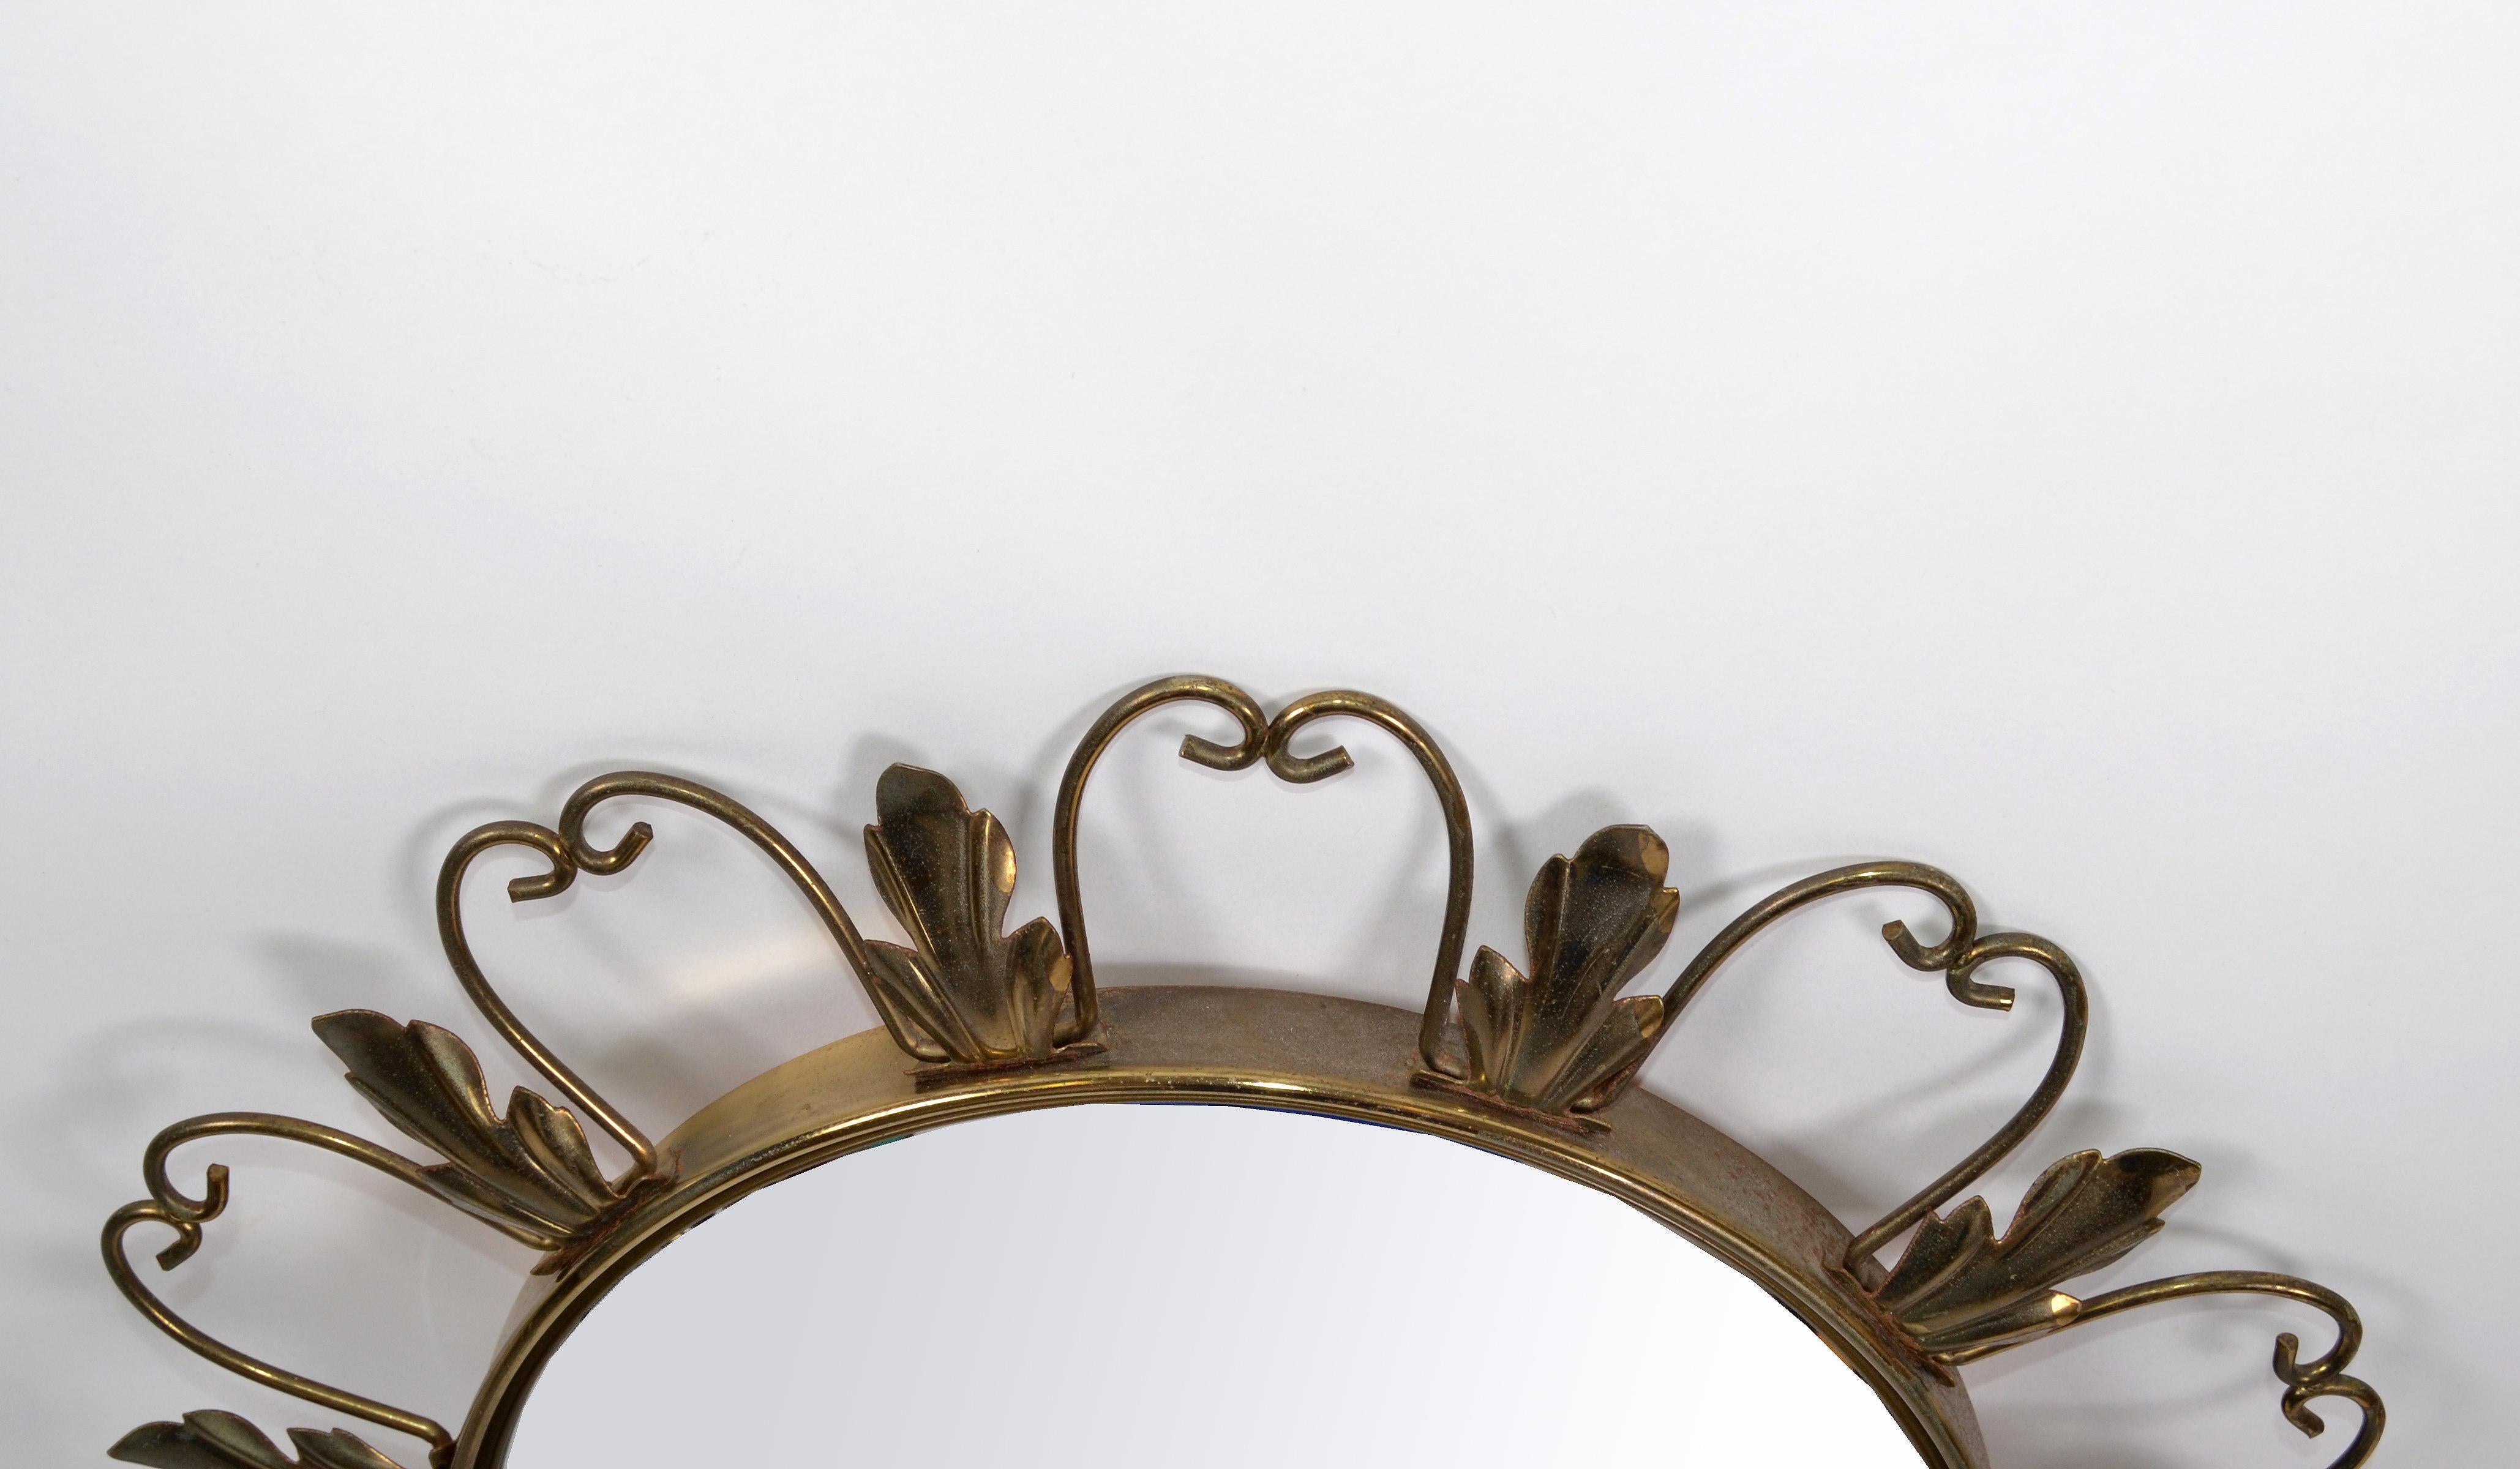 Hand-Crafted Neoclassical Signed 1950s Brass Sunburst Mirrors, Convex Mirror Made in Belgium For Sale